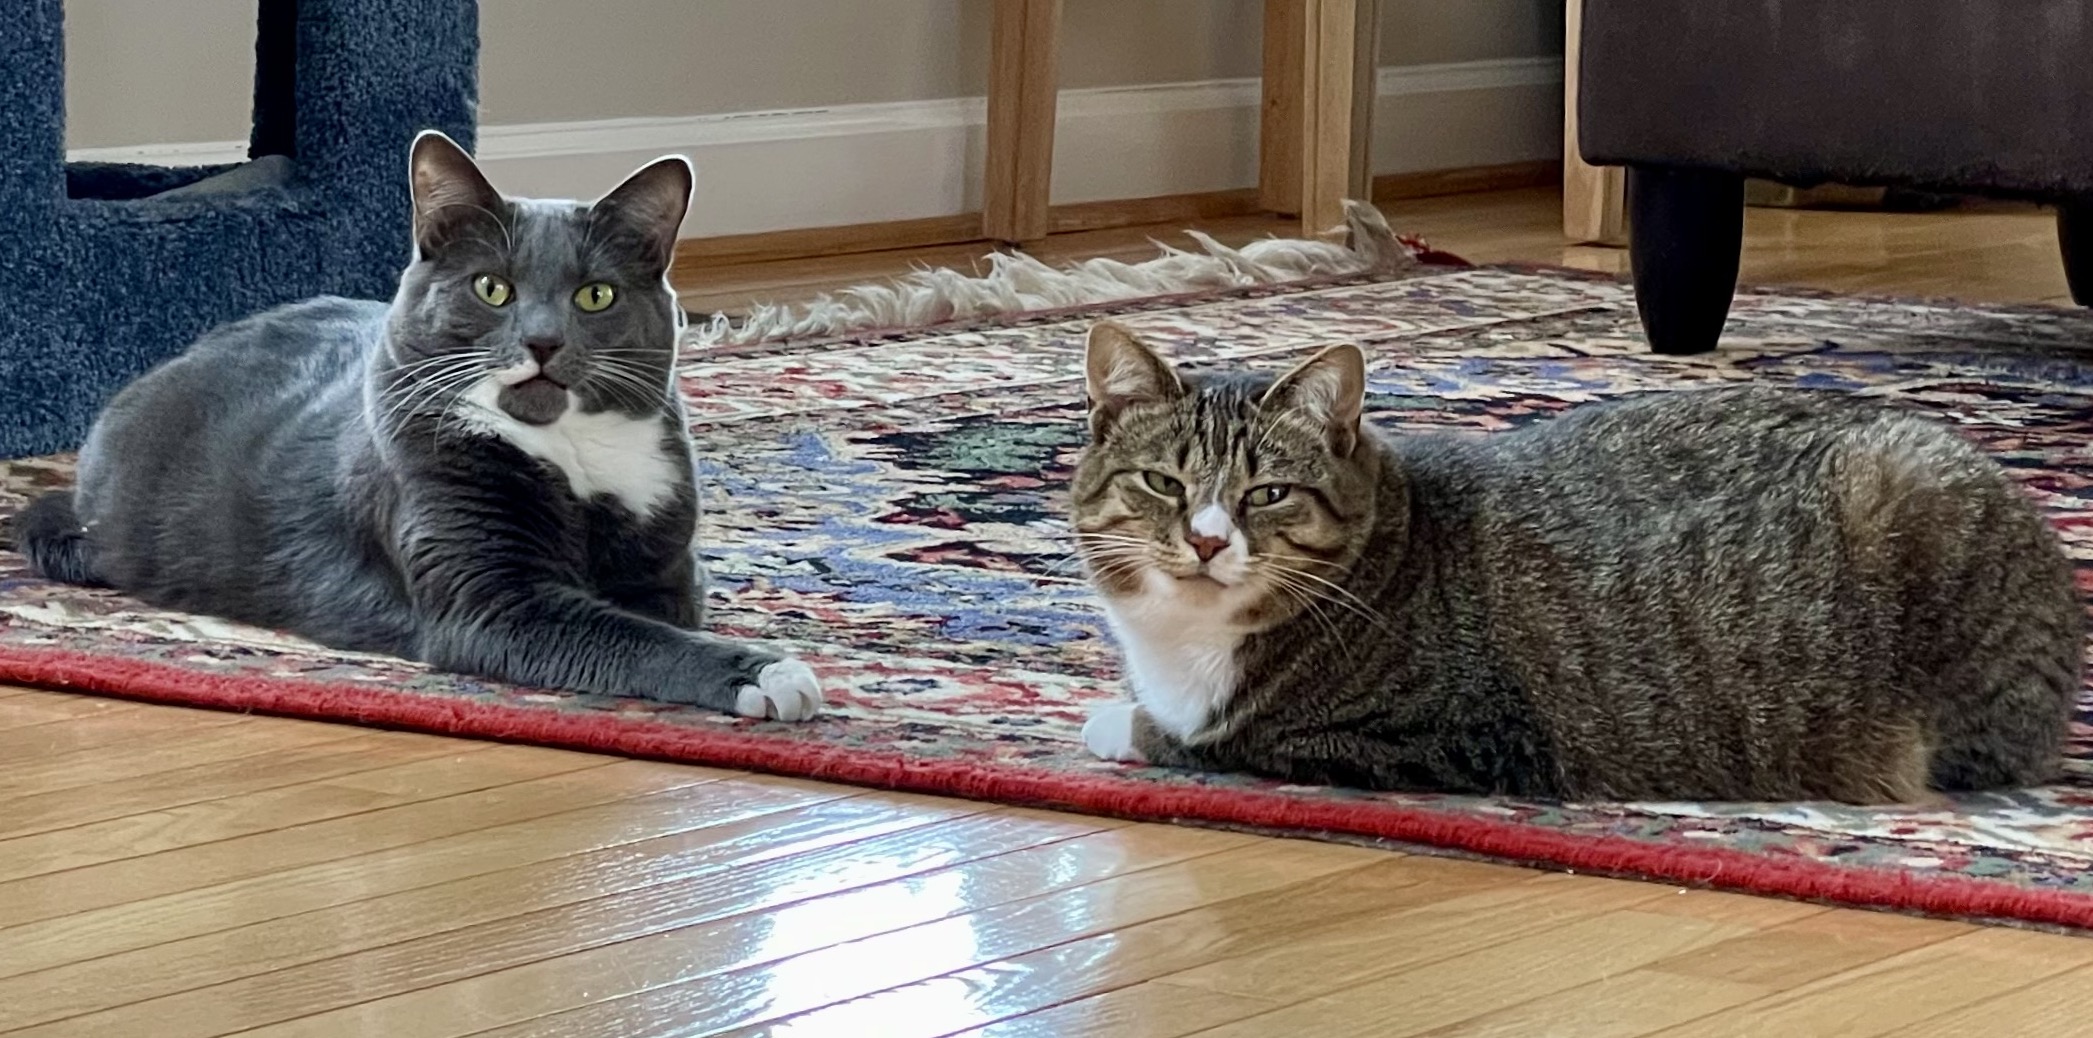 https://www.askamanager.org/wp-content/uploads/2022/04/Wallace-and-Sophie-on-rug.jpeg